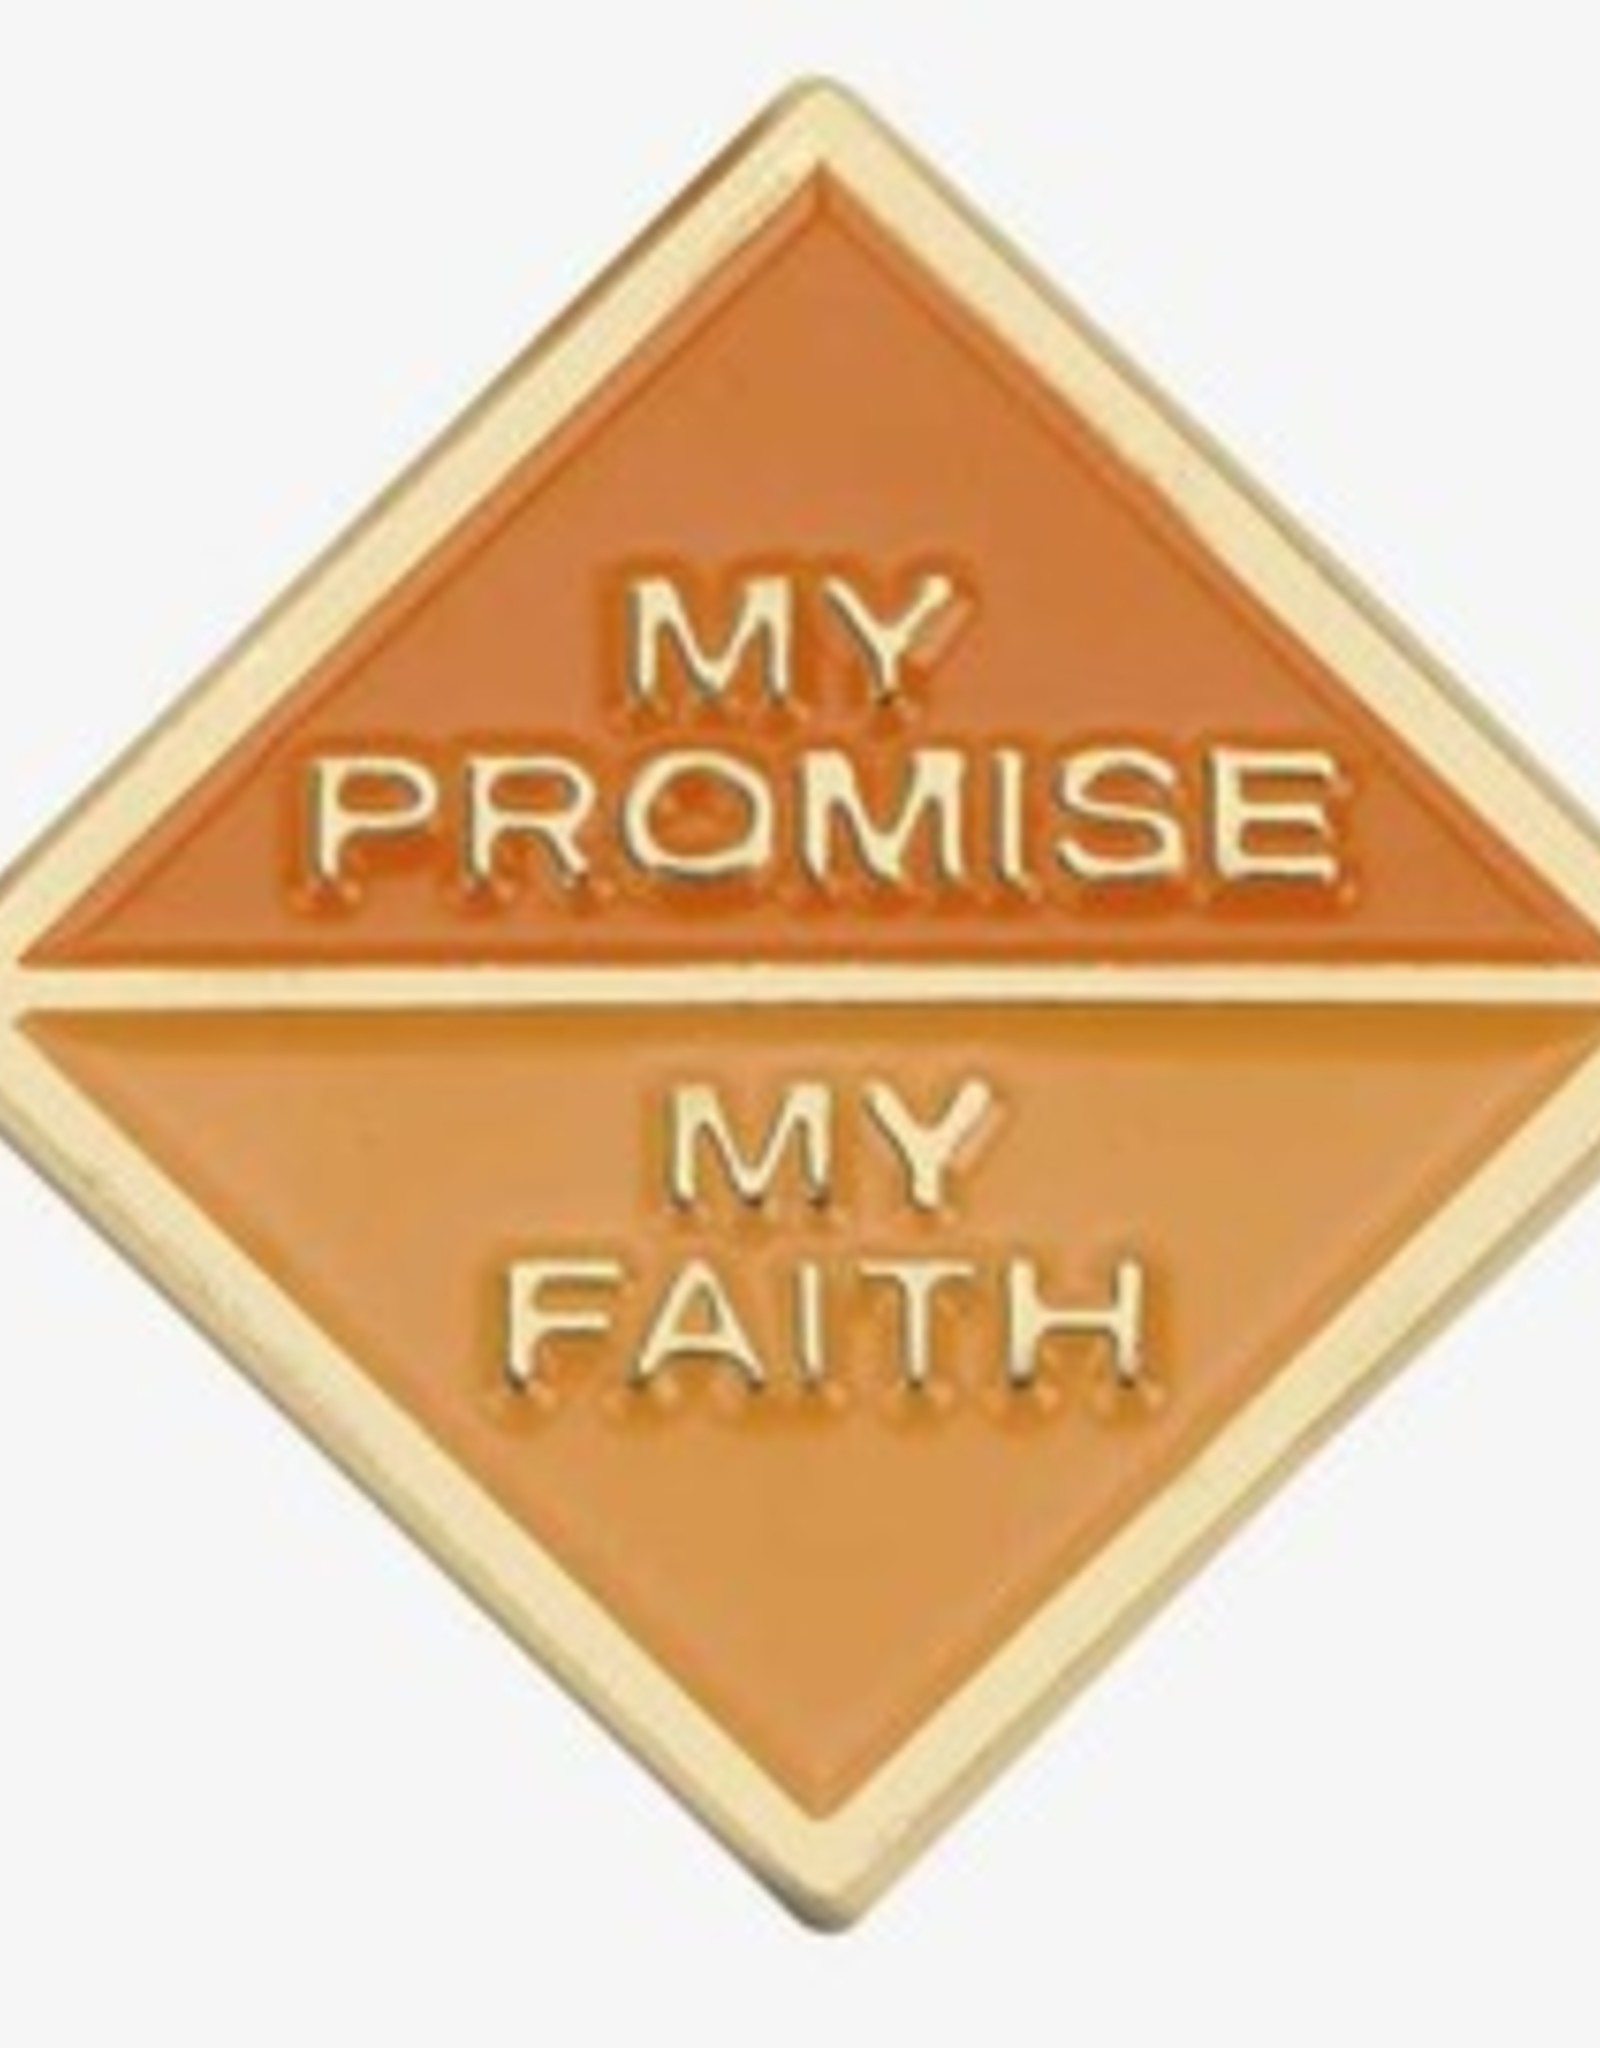 GIRL SCOUTS OF THE USA Senior My Promise/Faith Pin 2